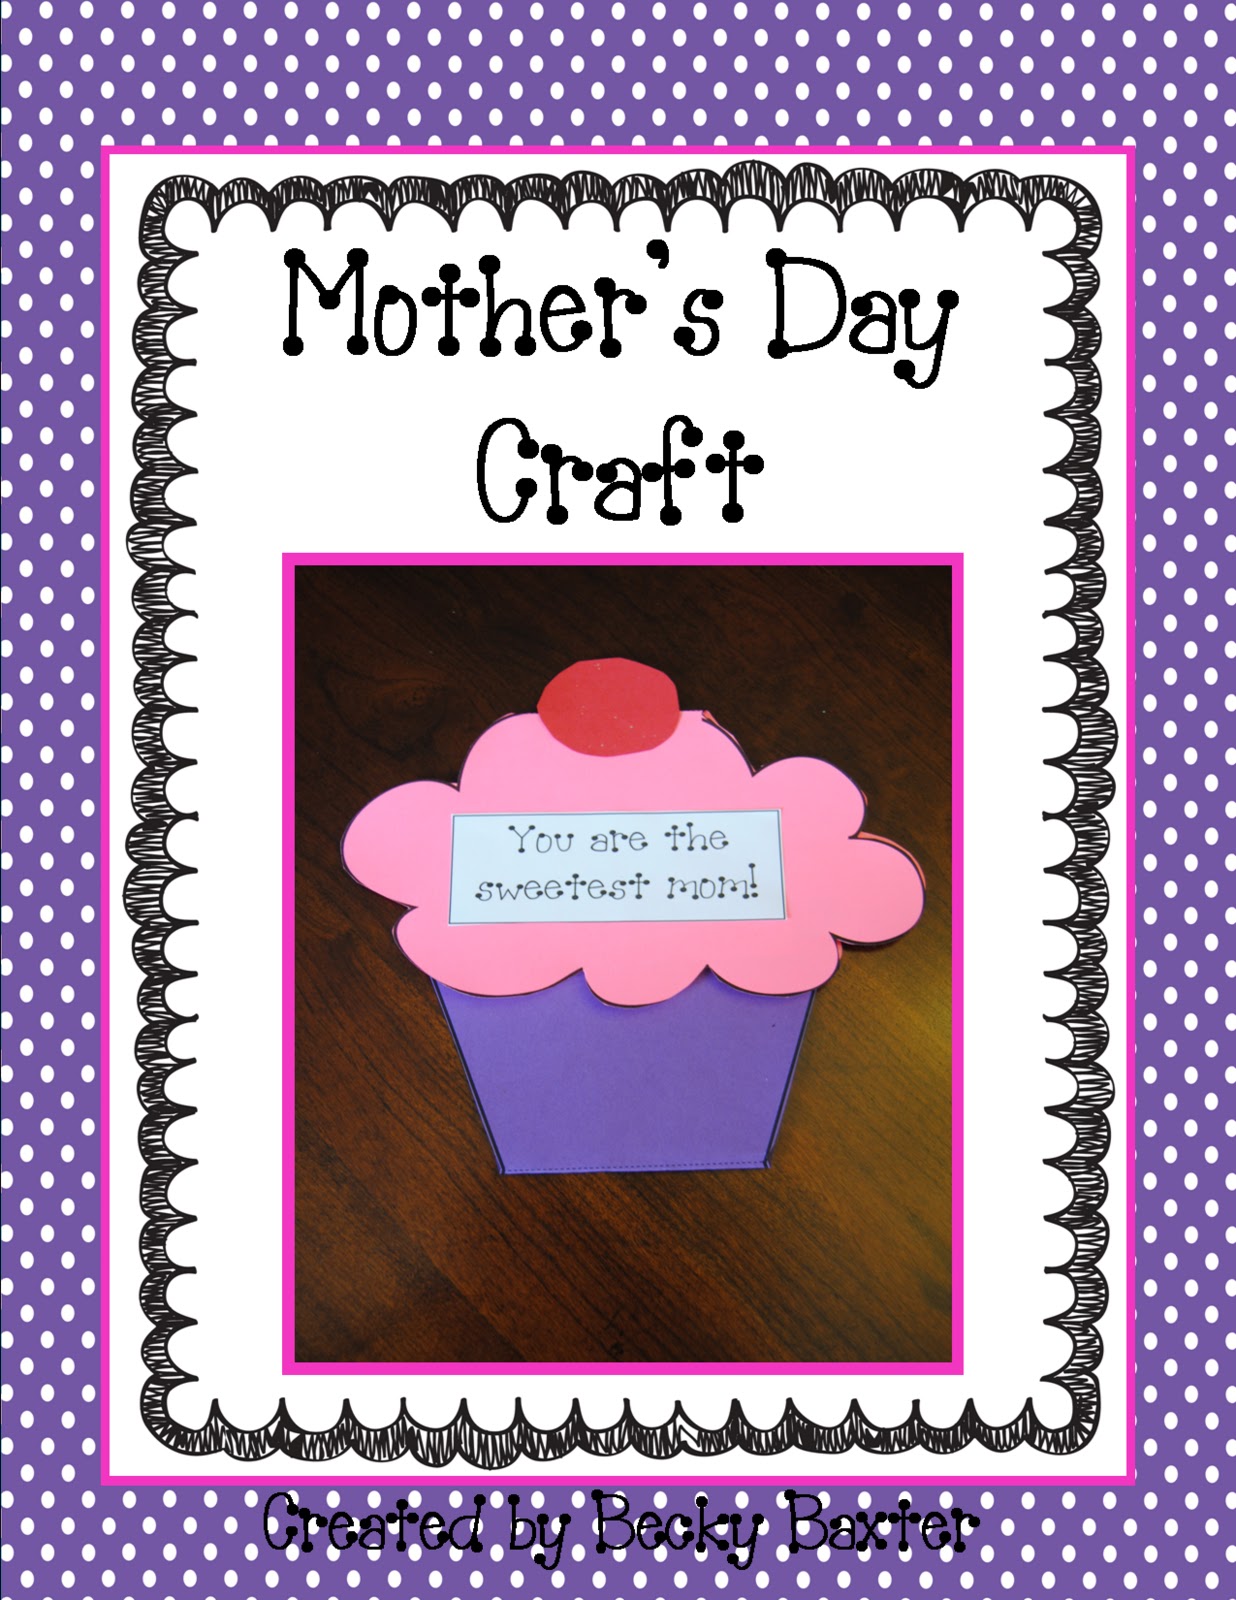 teaching-learning-loving-may-currently-mother-s-day-craft-and-3